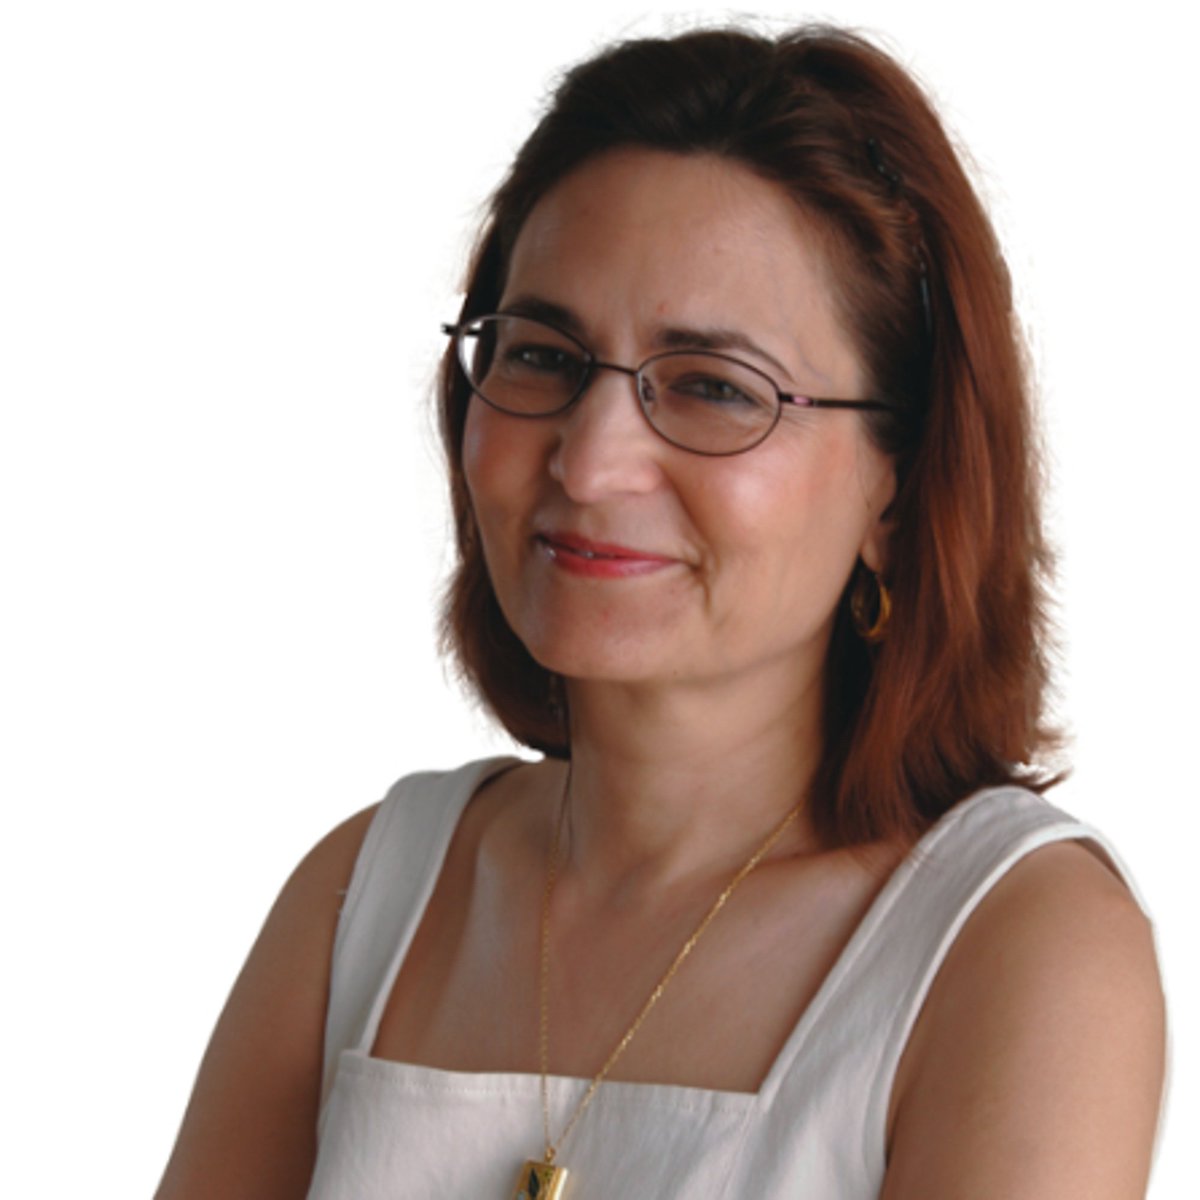 Susan Akram, director of the International Human Rights Clinic at the BU School of Law, said she saw generational trauma firsthand. Akram started at BU in 1993 and now supervises students representing international non-governmental organizations.
dailyfreepress.com/2024/04/10/sch…